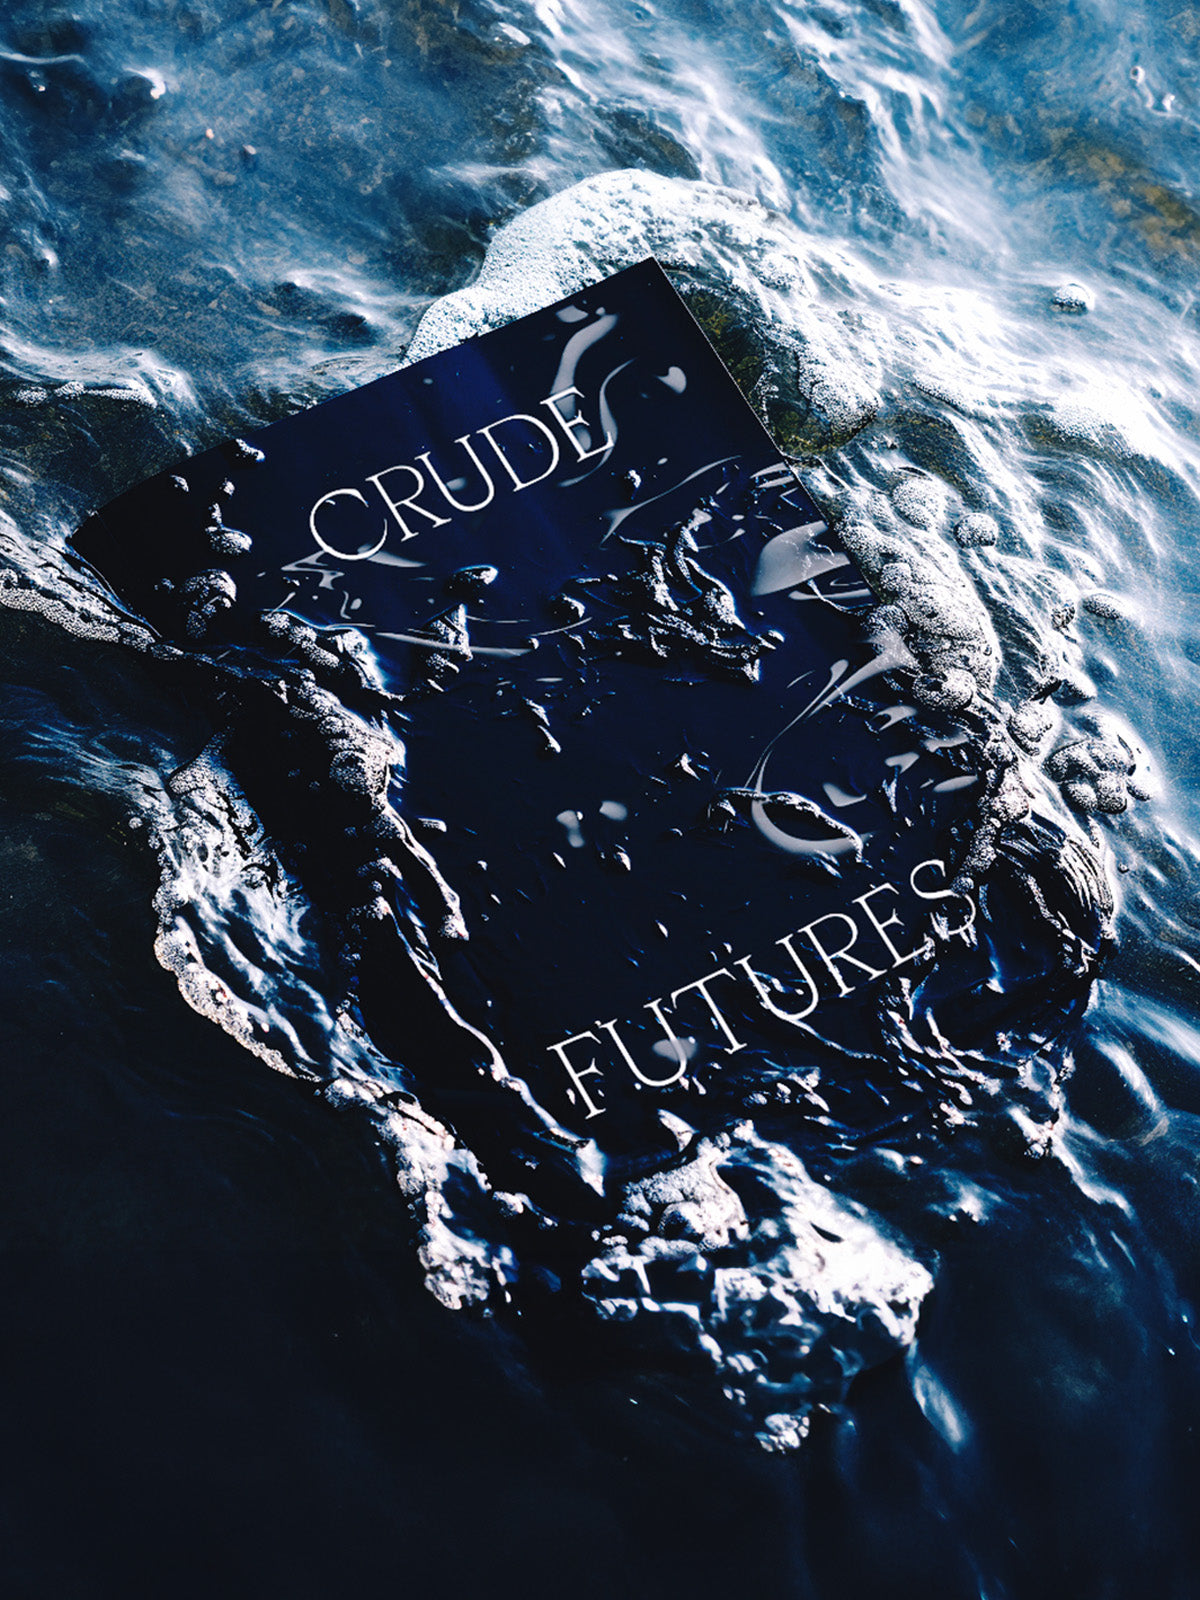 CRUDE FUTURES LIMITED EDITION (GAME + ZINE + POSTER)